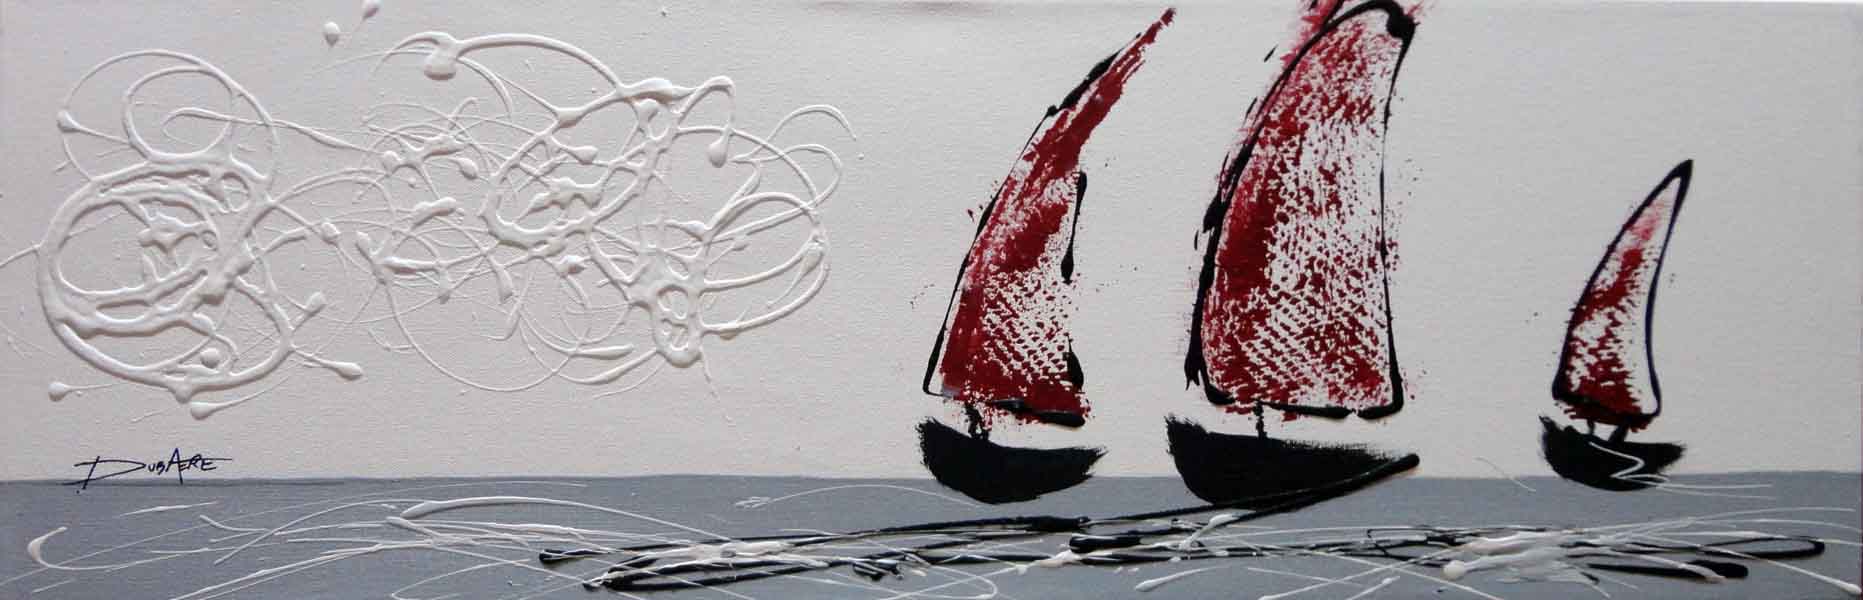 acrylic painting modern canvas boats